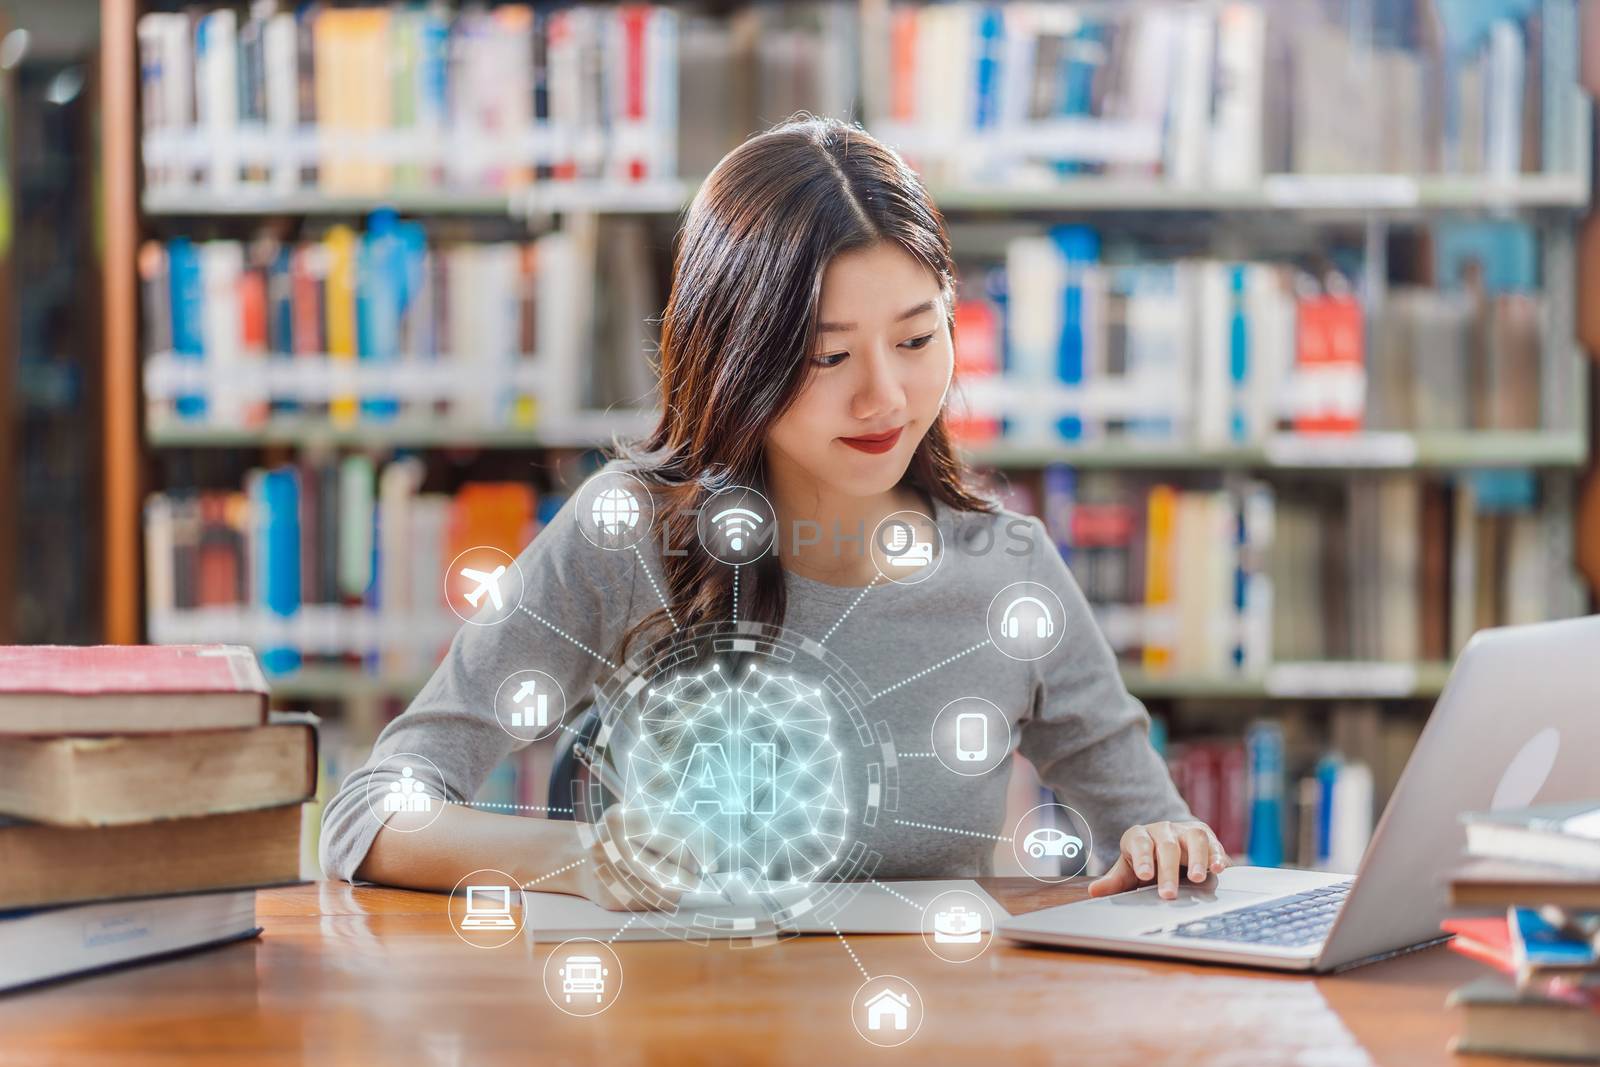 Polygonal brain shape of an artificial intelligence with various icon of smart city Internet of Things Technology over Asian young Student using technology laptop in library of university